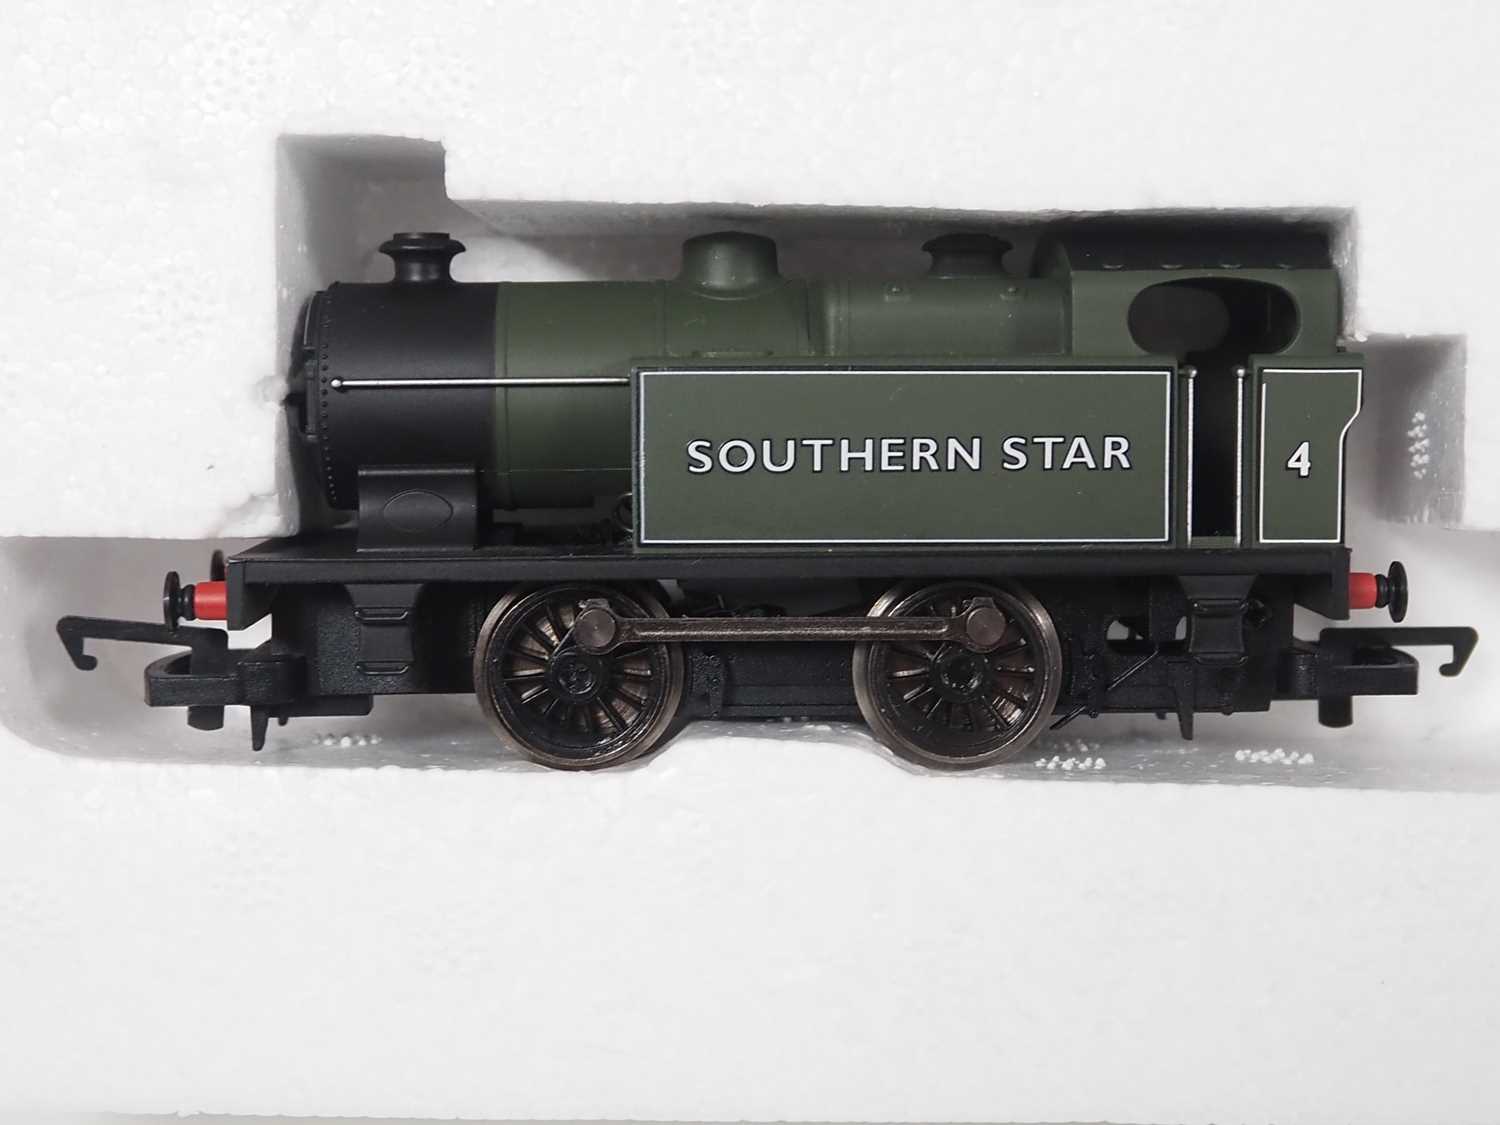 A HORNBY R1132 OO gauge 'The Southern Star' train set comprising a steam loco, wagons, coach and - Image 3 of 8